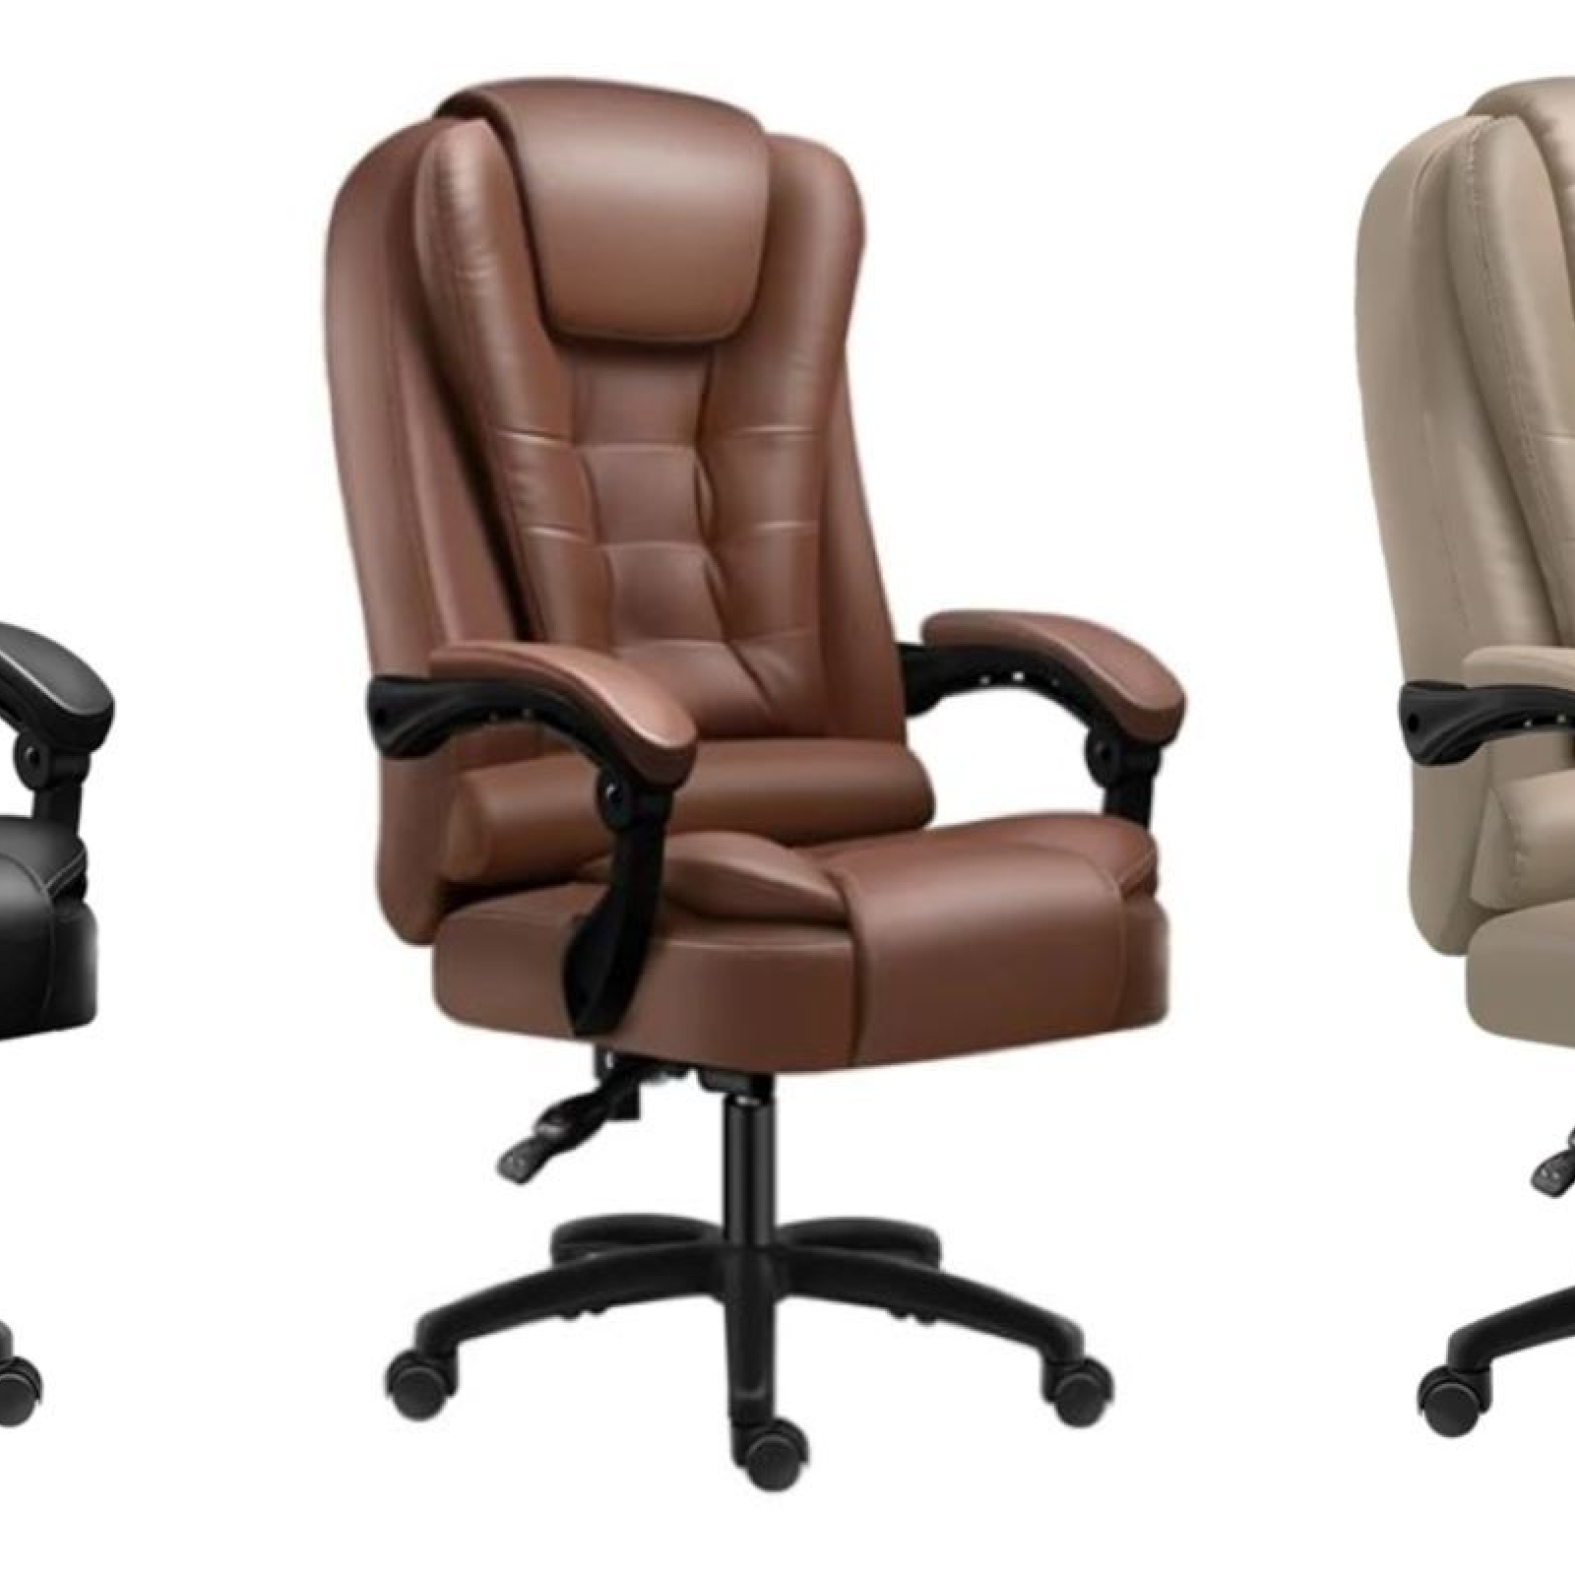 3 COLORS AVAILABLE, executive chair, high-back support, reclining, adjustable height, multiple cushions, sliding armrest